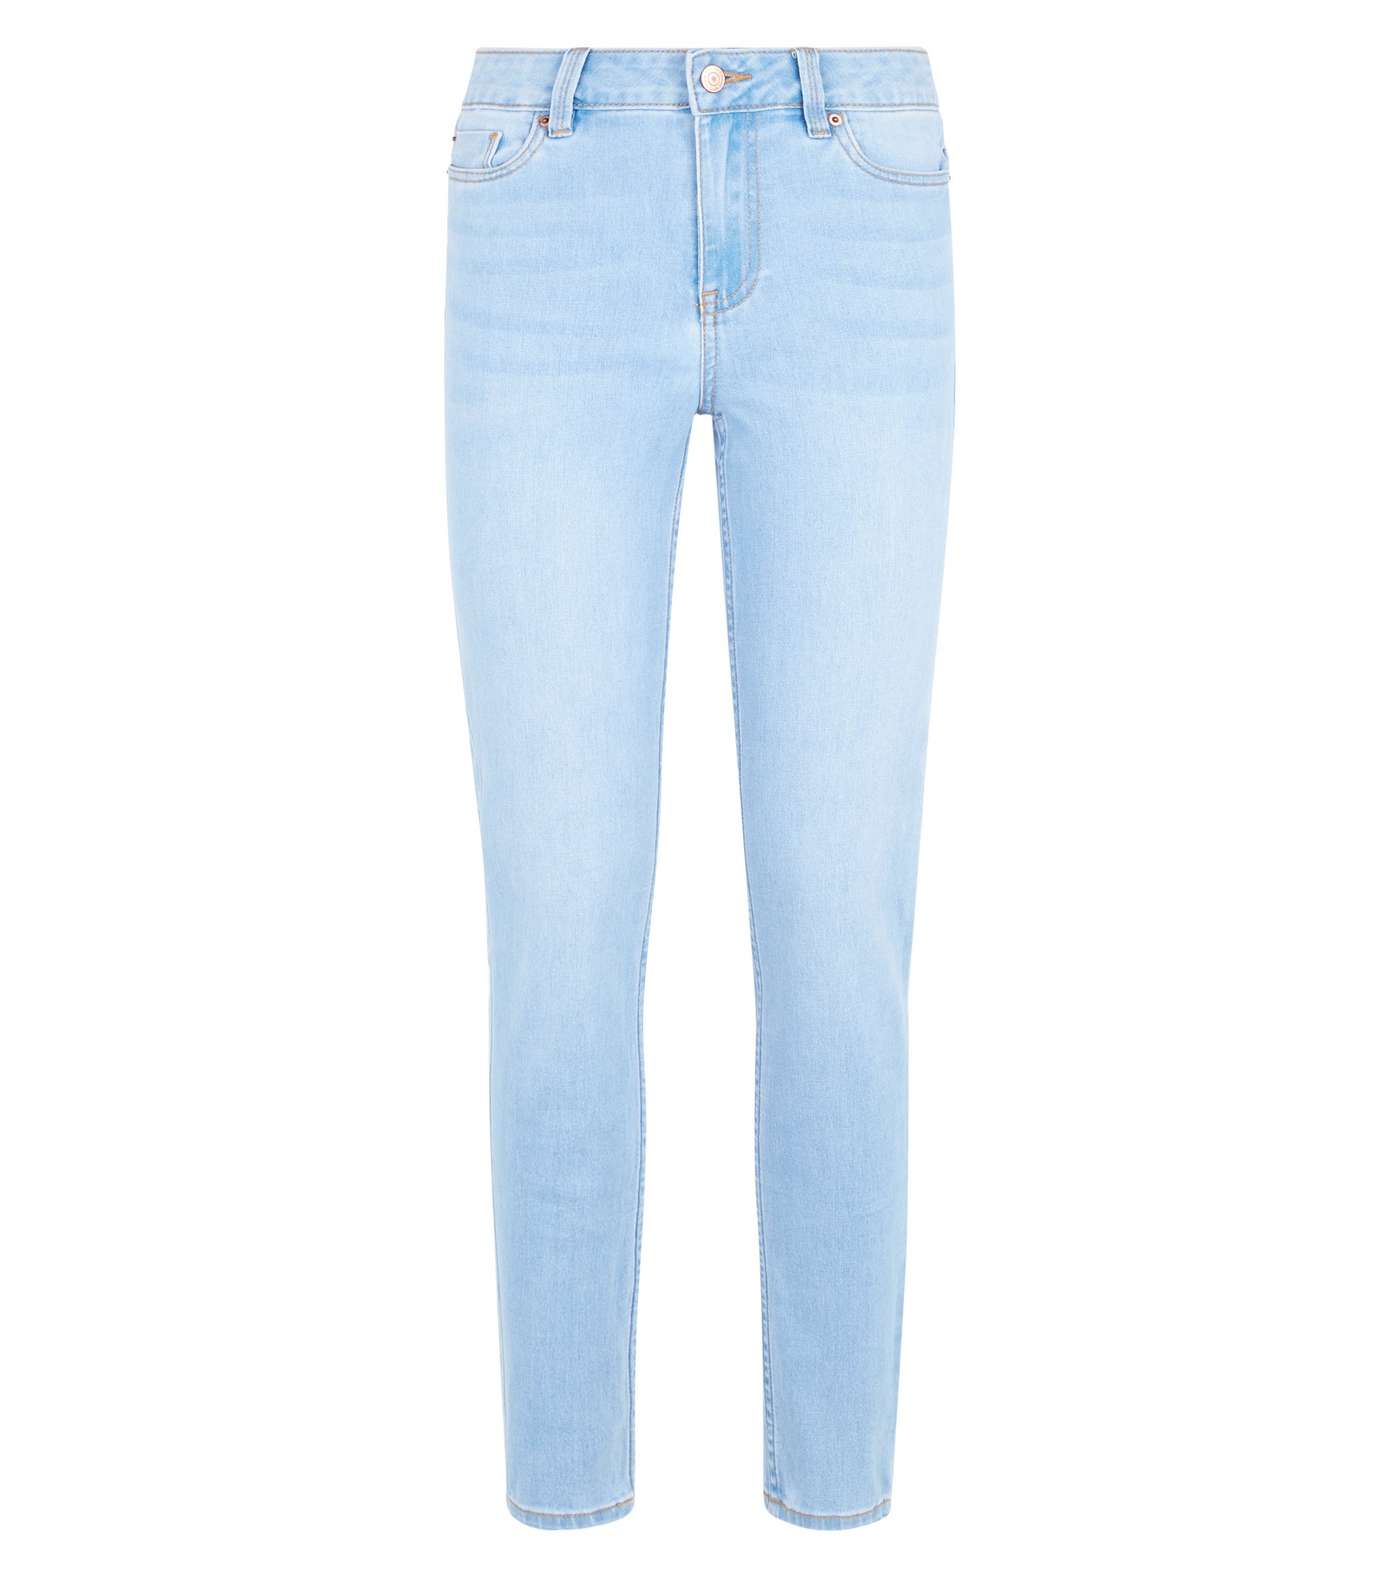 Blue Bleach Wash Mid Rise India Super Skinny Jeans Image 4